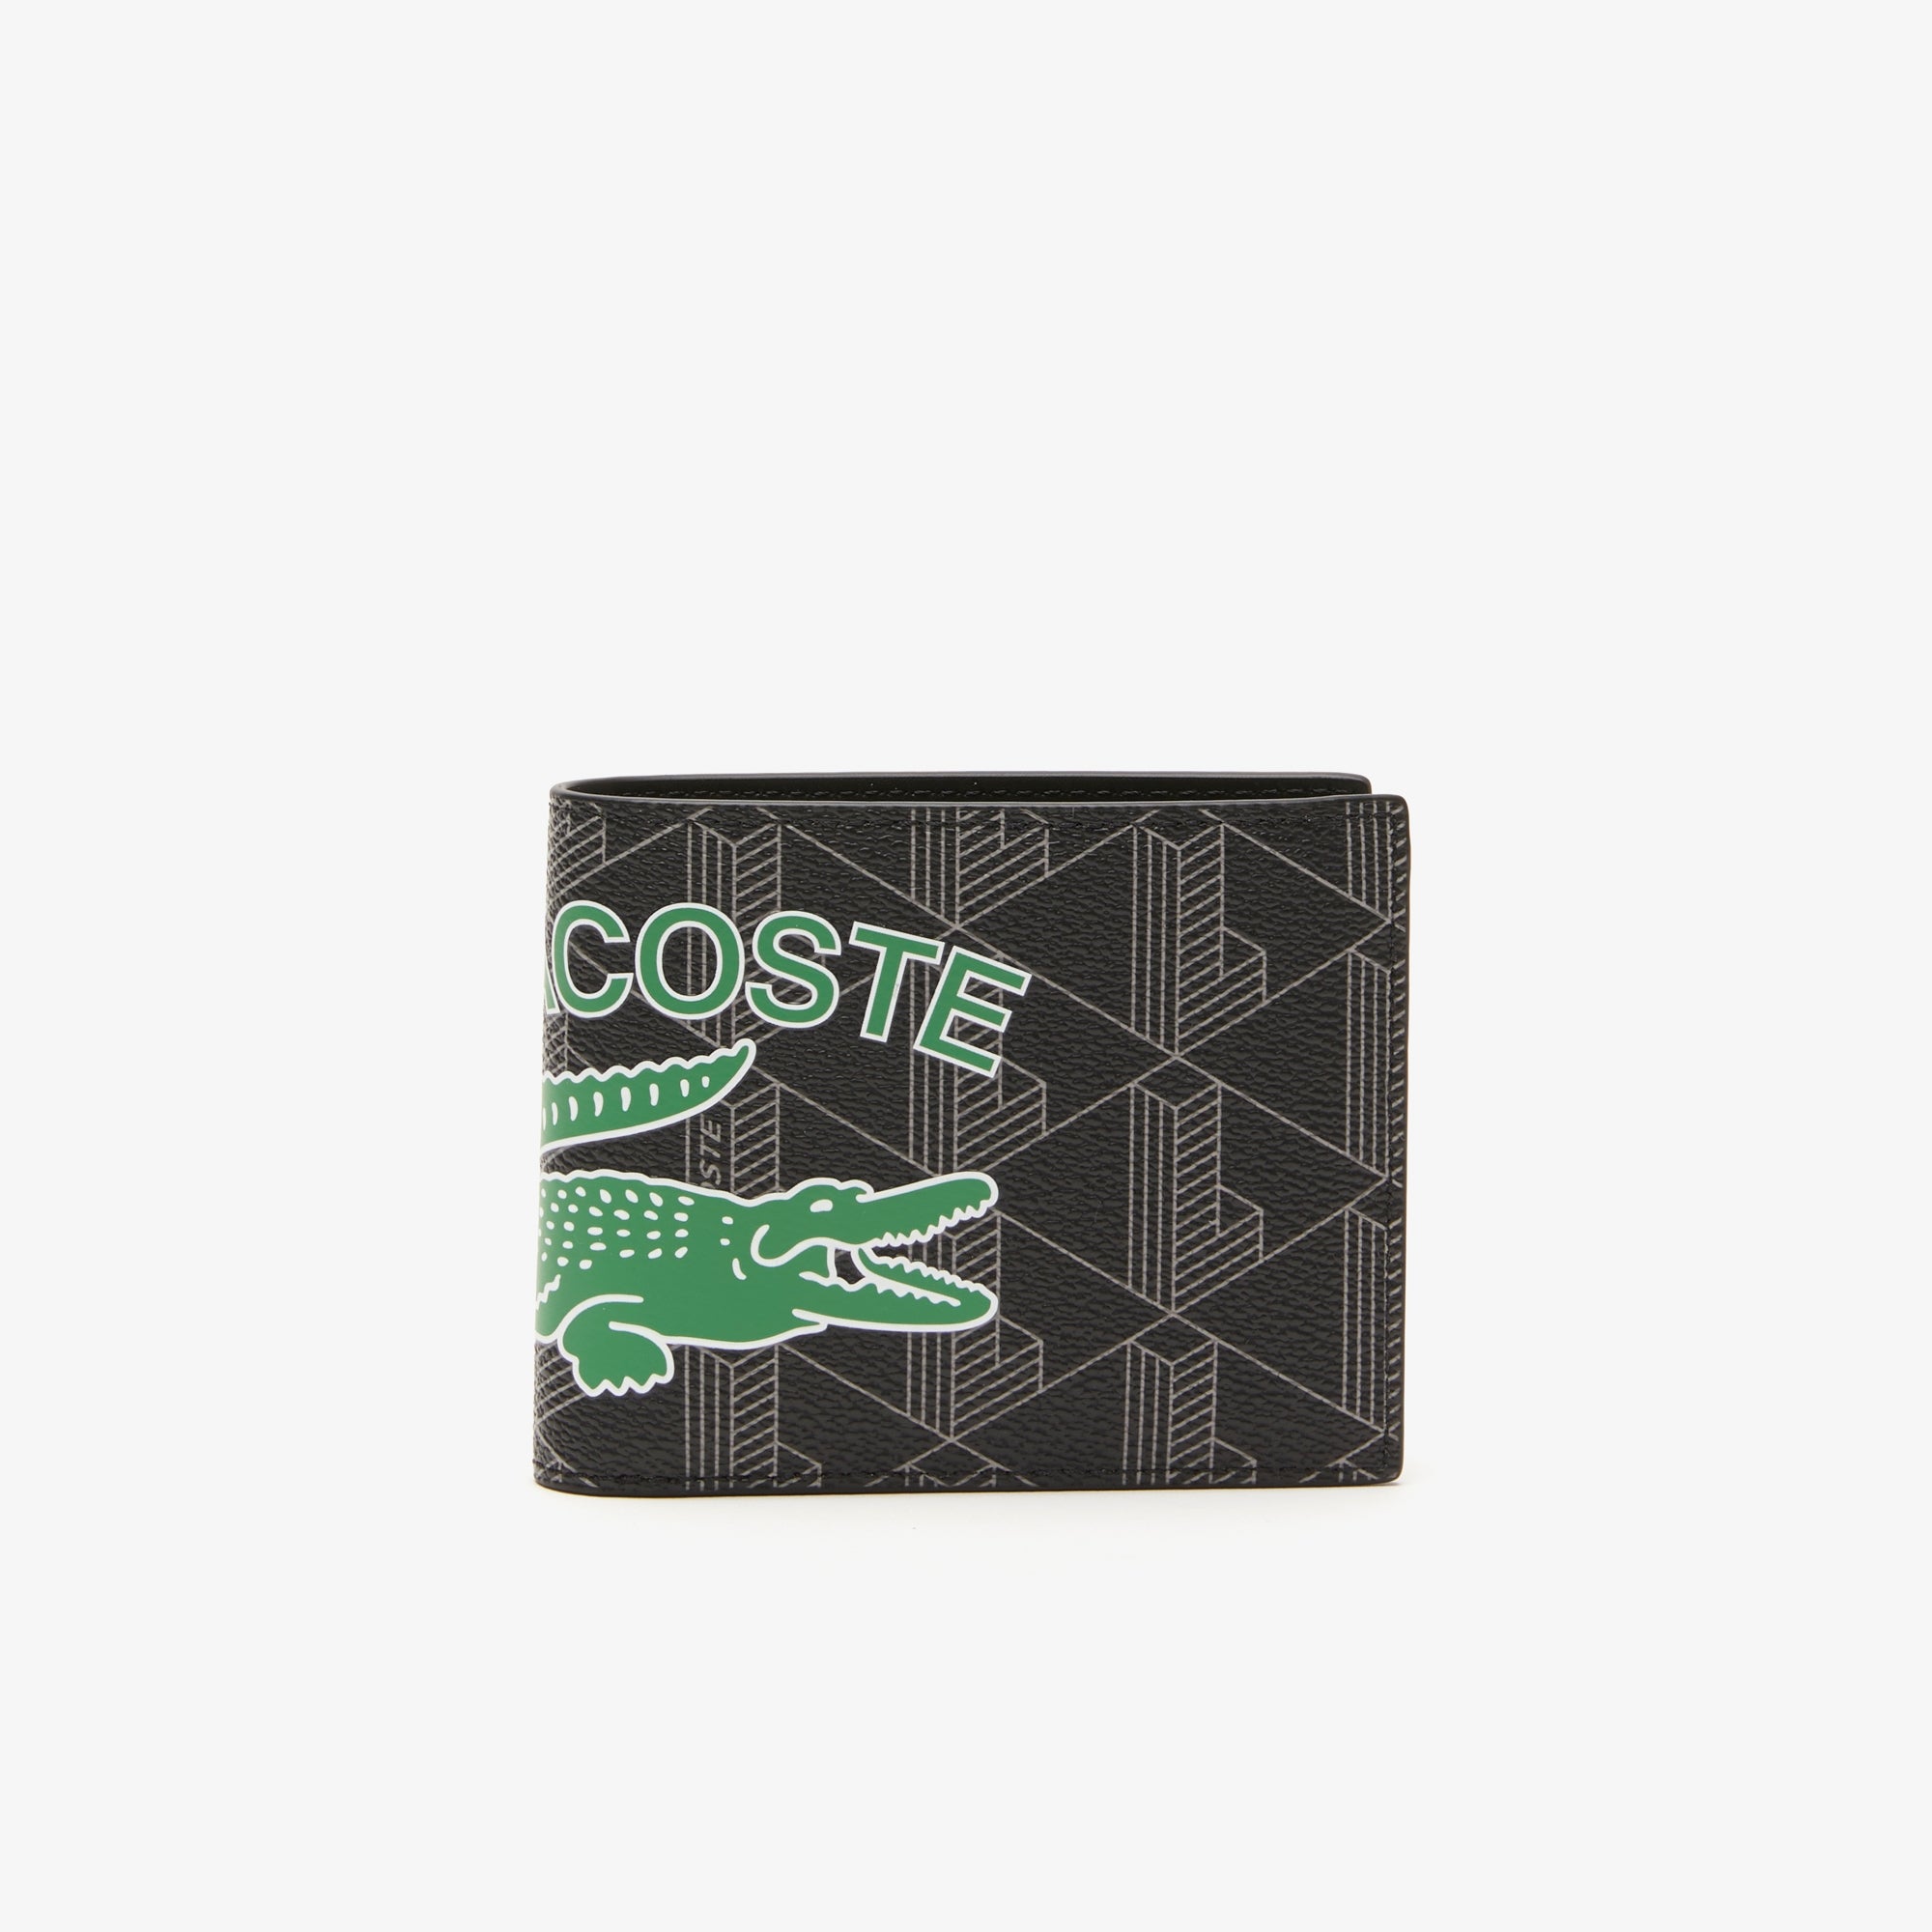  Lacoste Men's Mens Pvc Flat Crossover Bag Cross Body, Noir, One  Size US : Clothing, Shoes & Jewelry